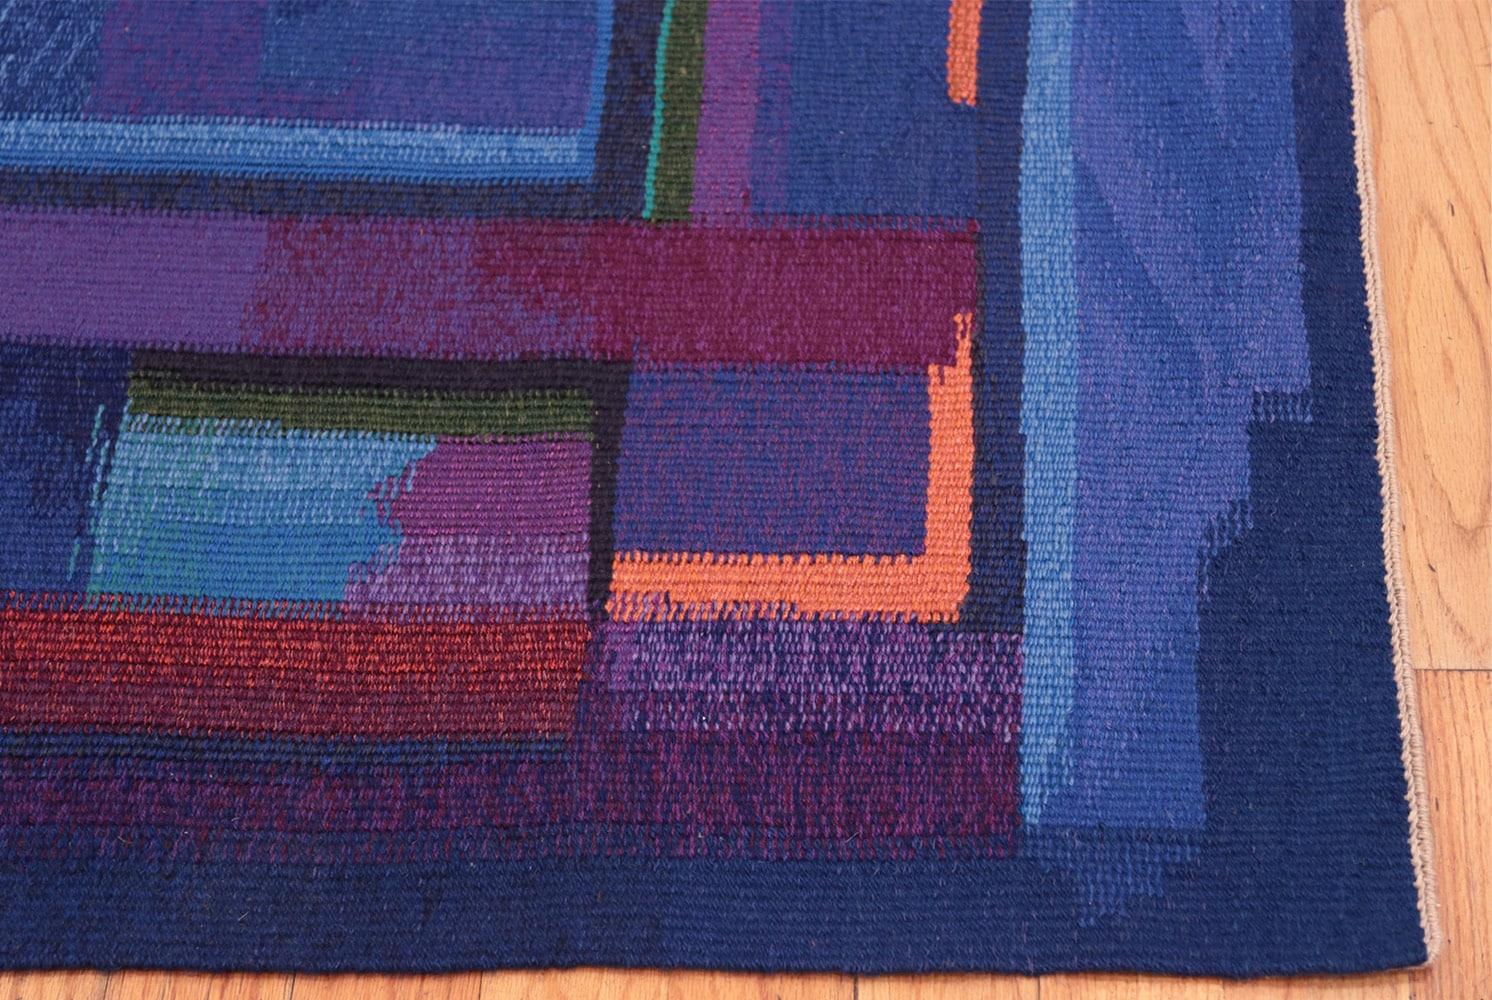 Vintage Norwegian Tapestry Rug by Eevahenna Aalto, Country Of Origin: Norway, Circa date: Mid 20th Century. Size: 3 ft 5 in x 4 ft 6 in (1.04 m x 1.37 m)